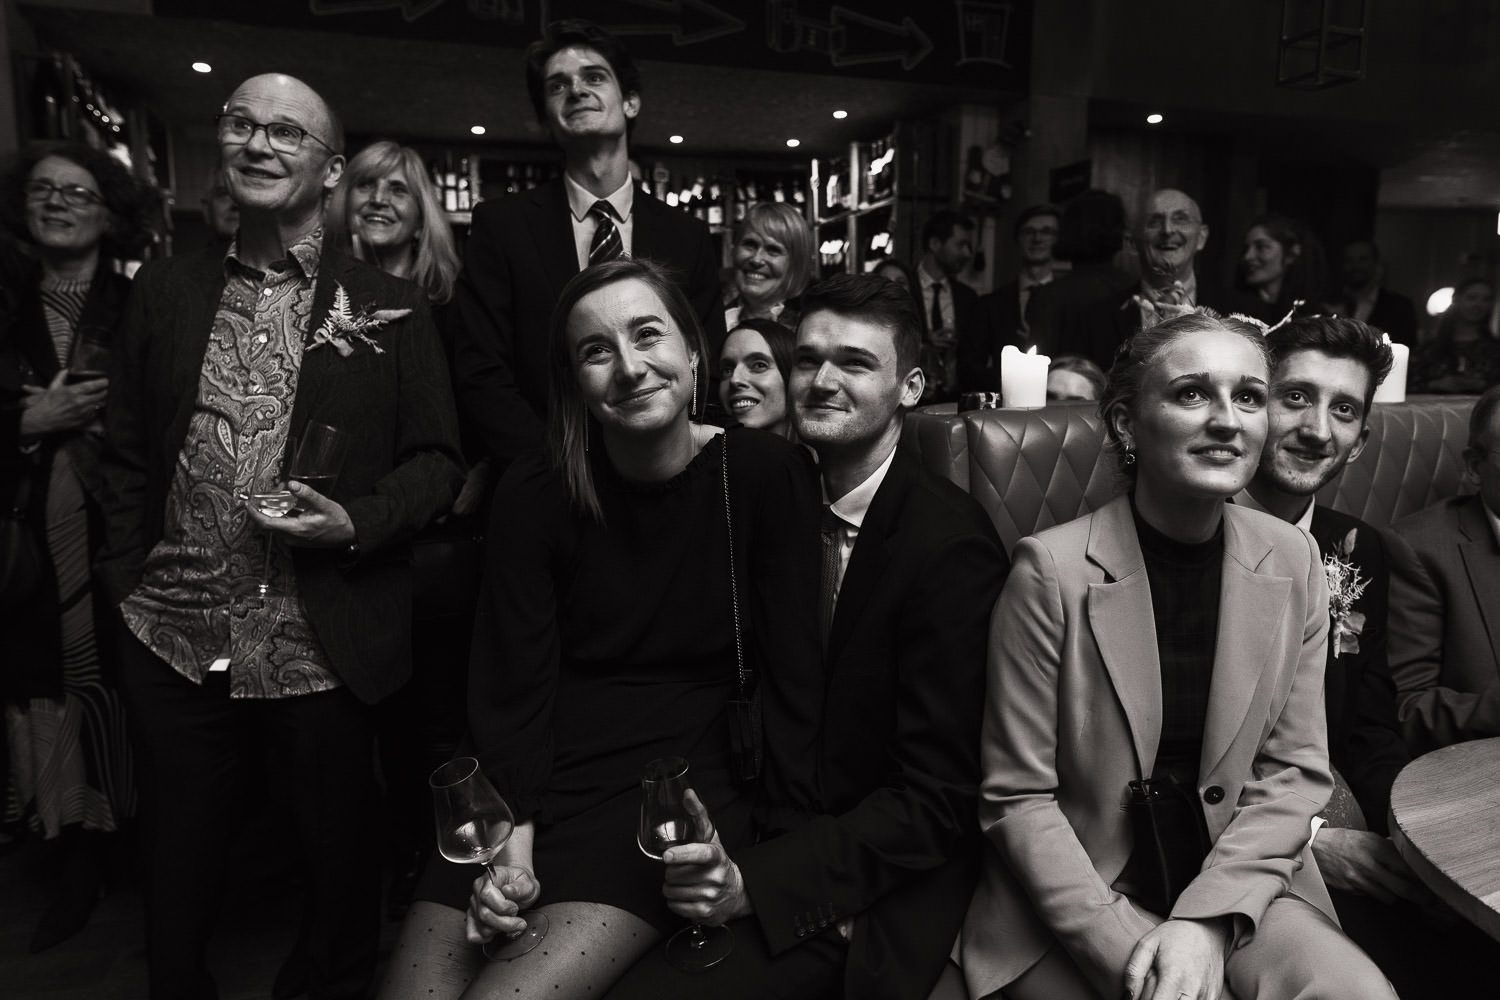 Smiling woman in dotty tights sits on man's lap. Surrounded by guests, they are watching speeches off camera.